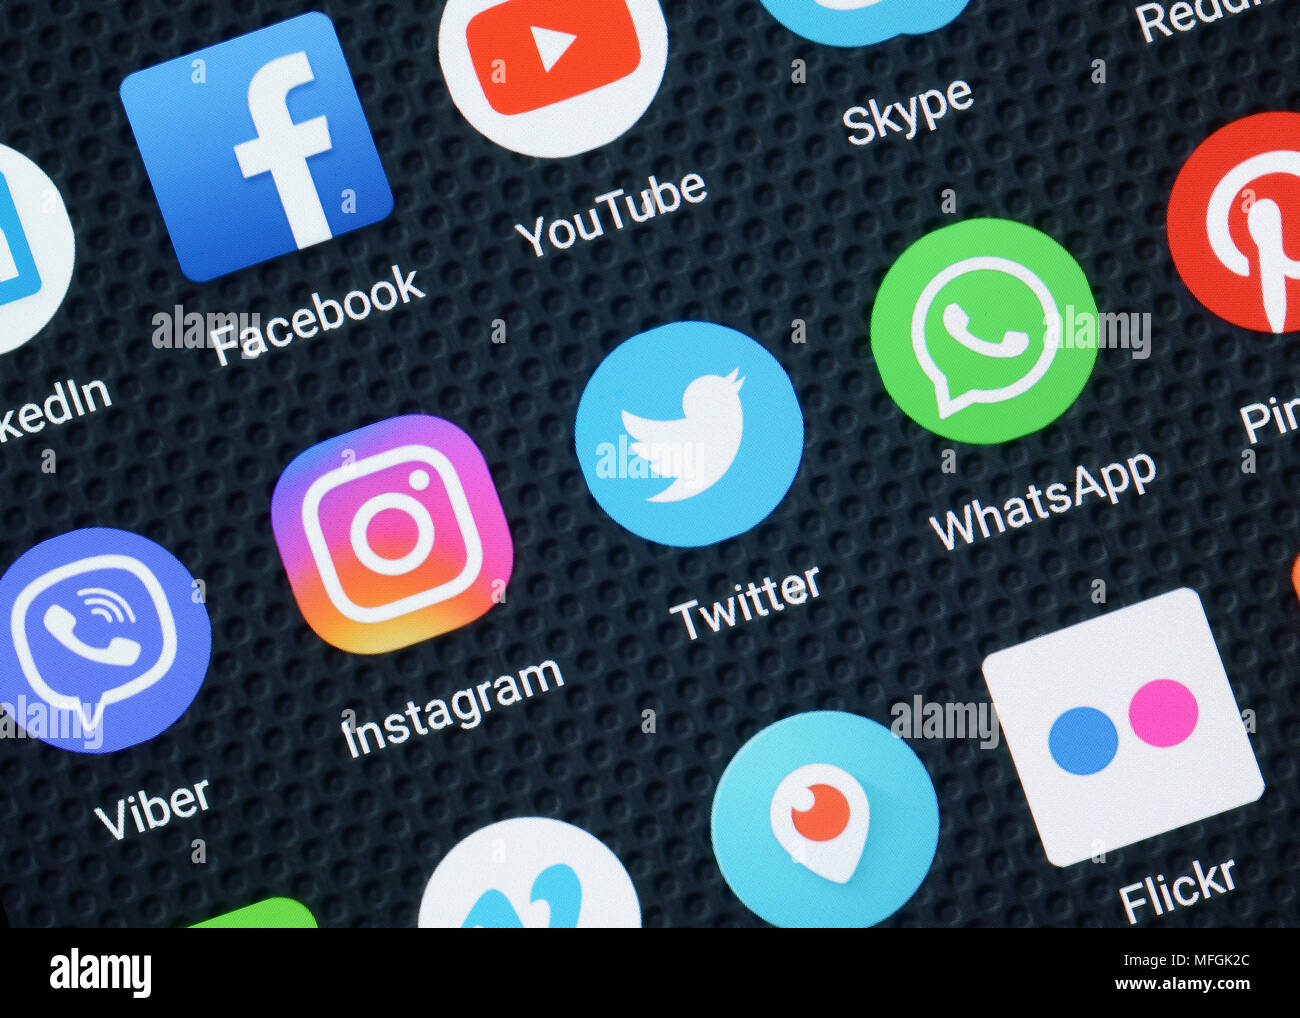 Social Media Apps on a Smartphone, Close Up Stock Photo